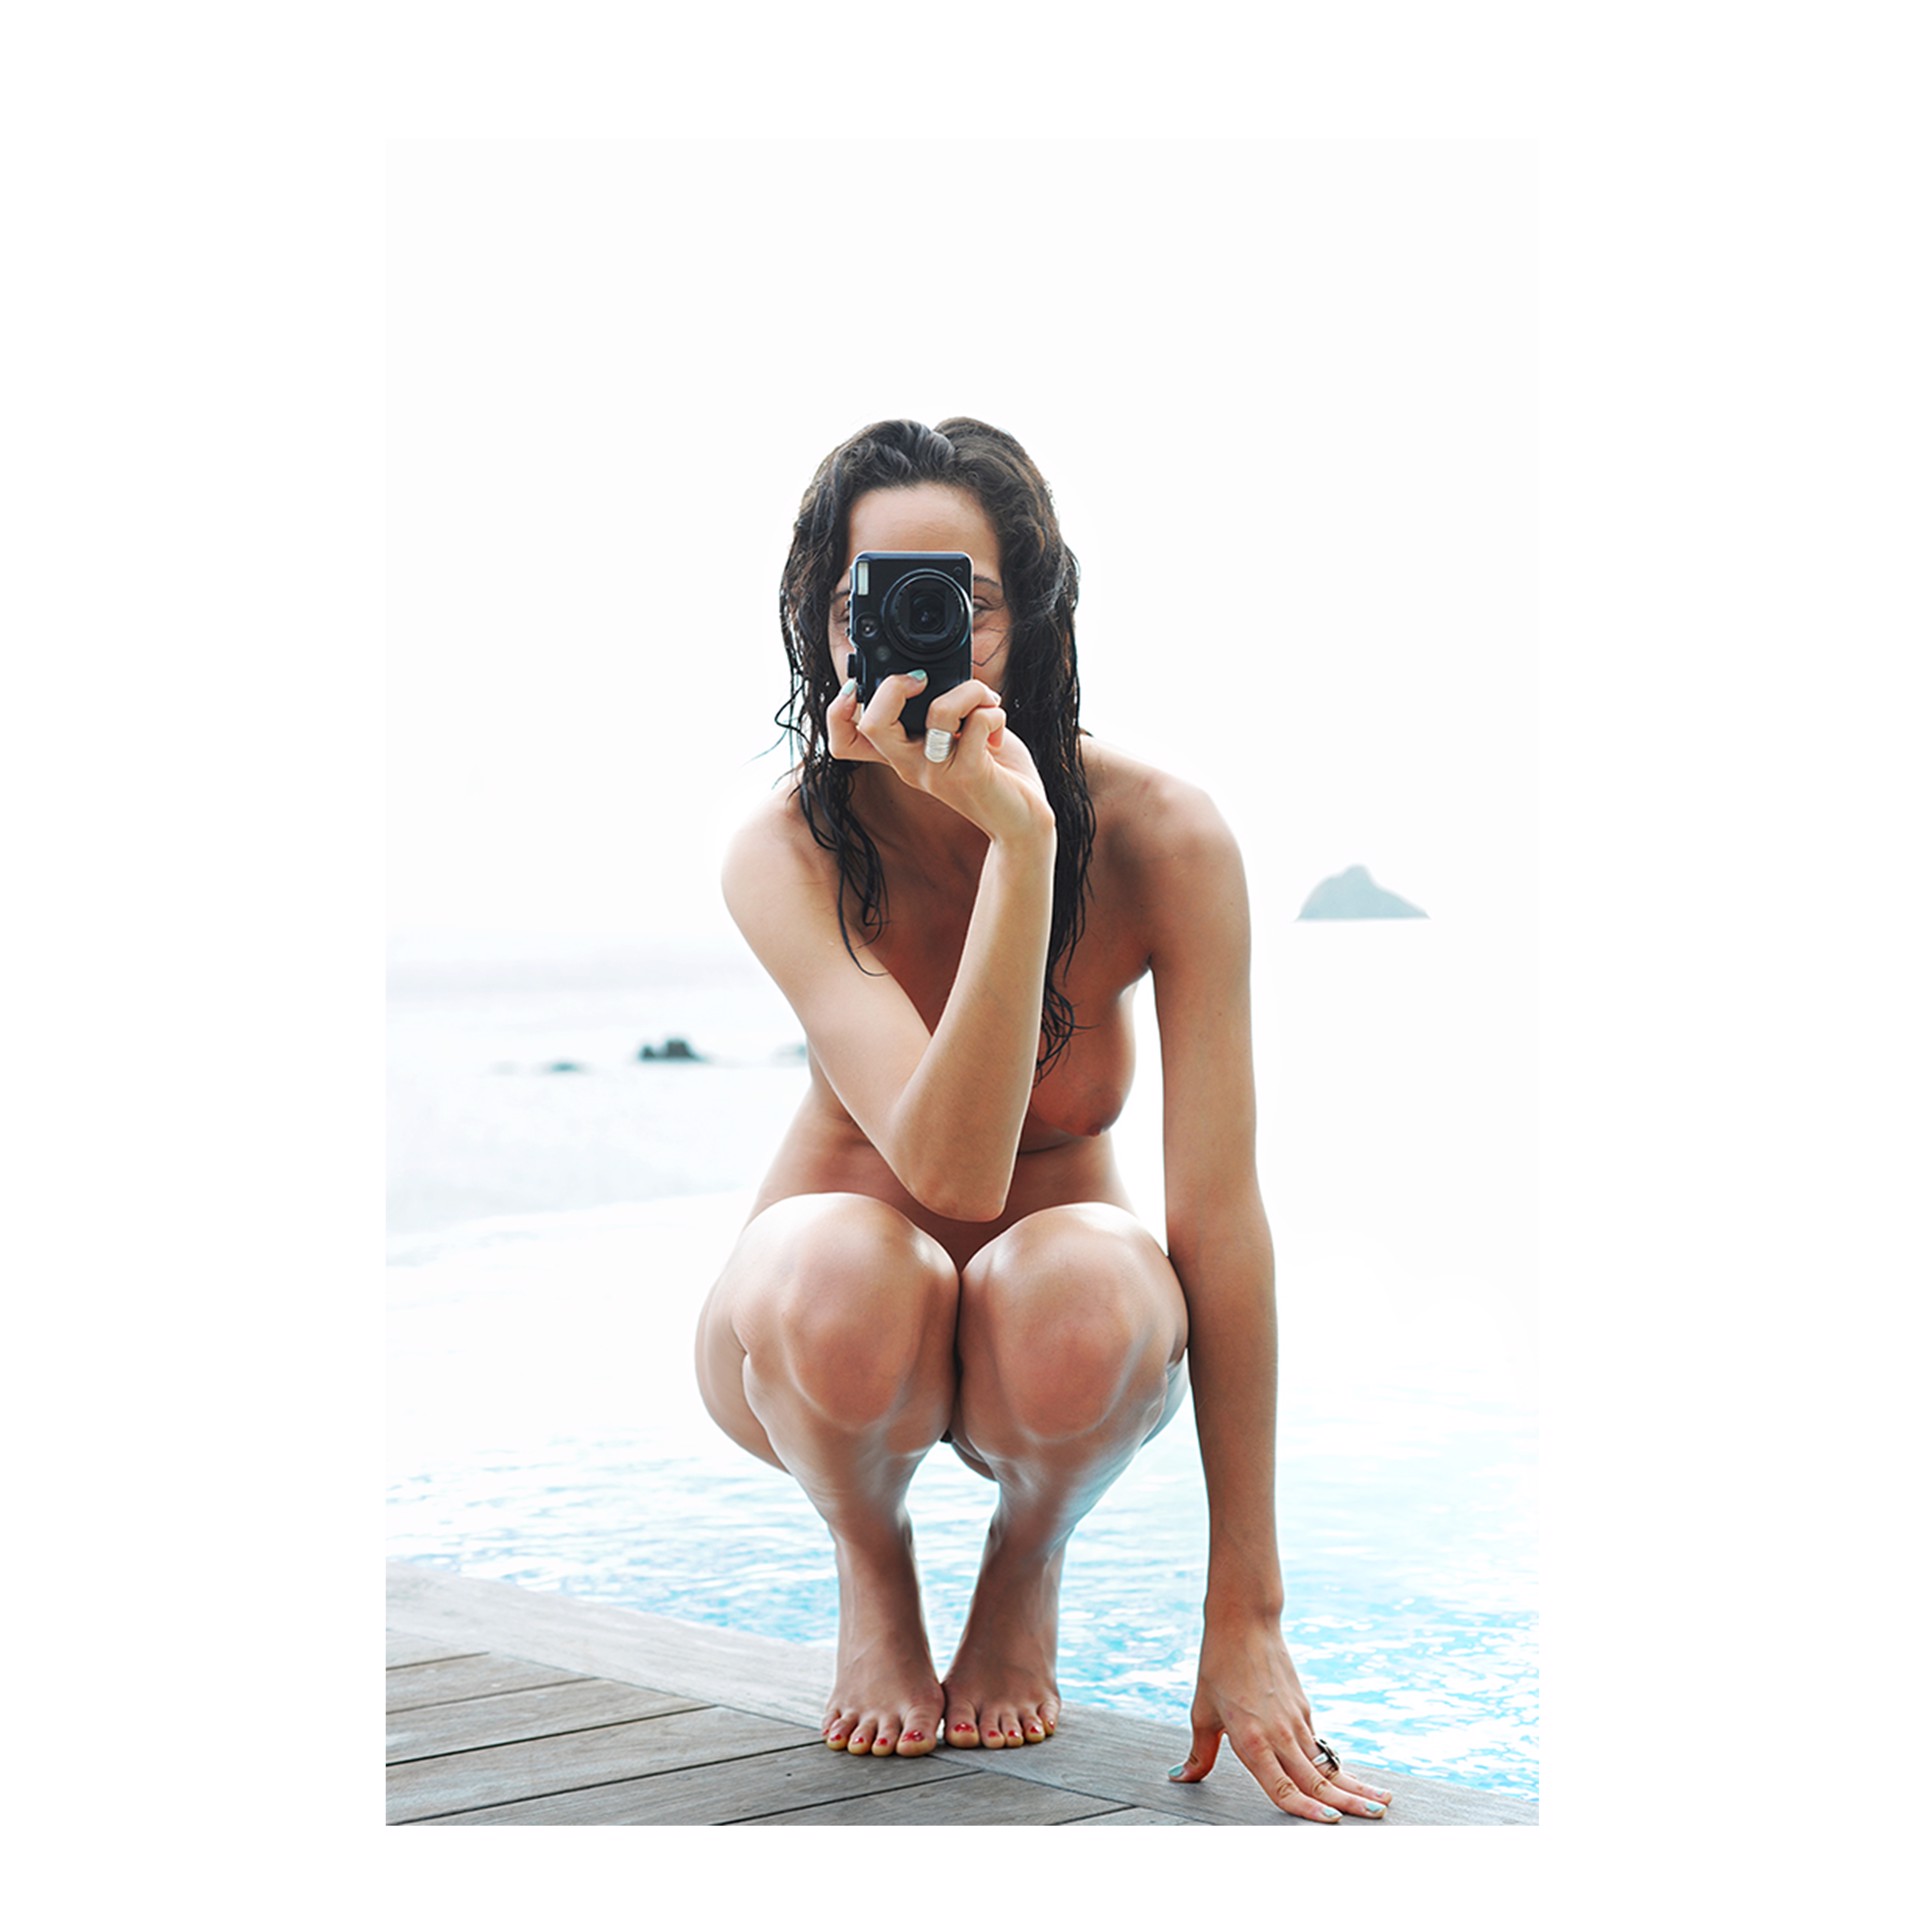 Lisa Clic (St Barth) [color] by Jean-Philippe Piter